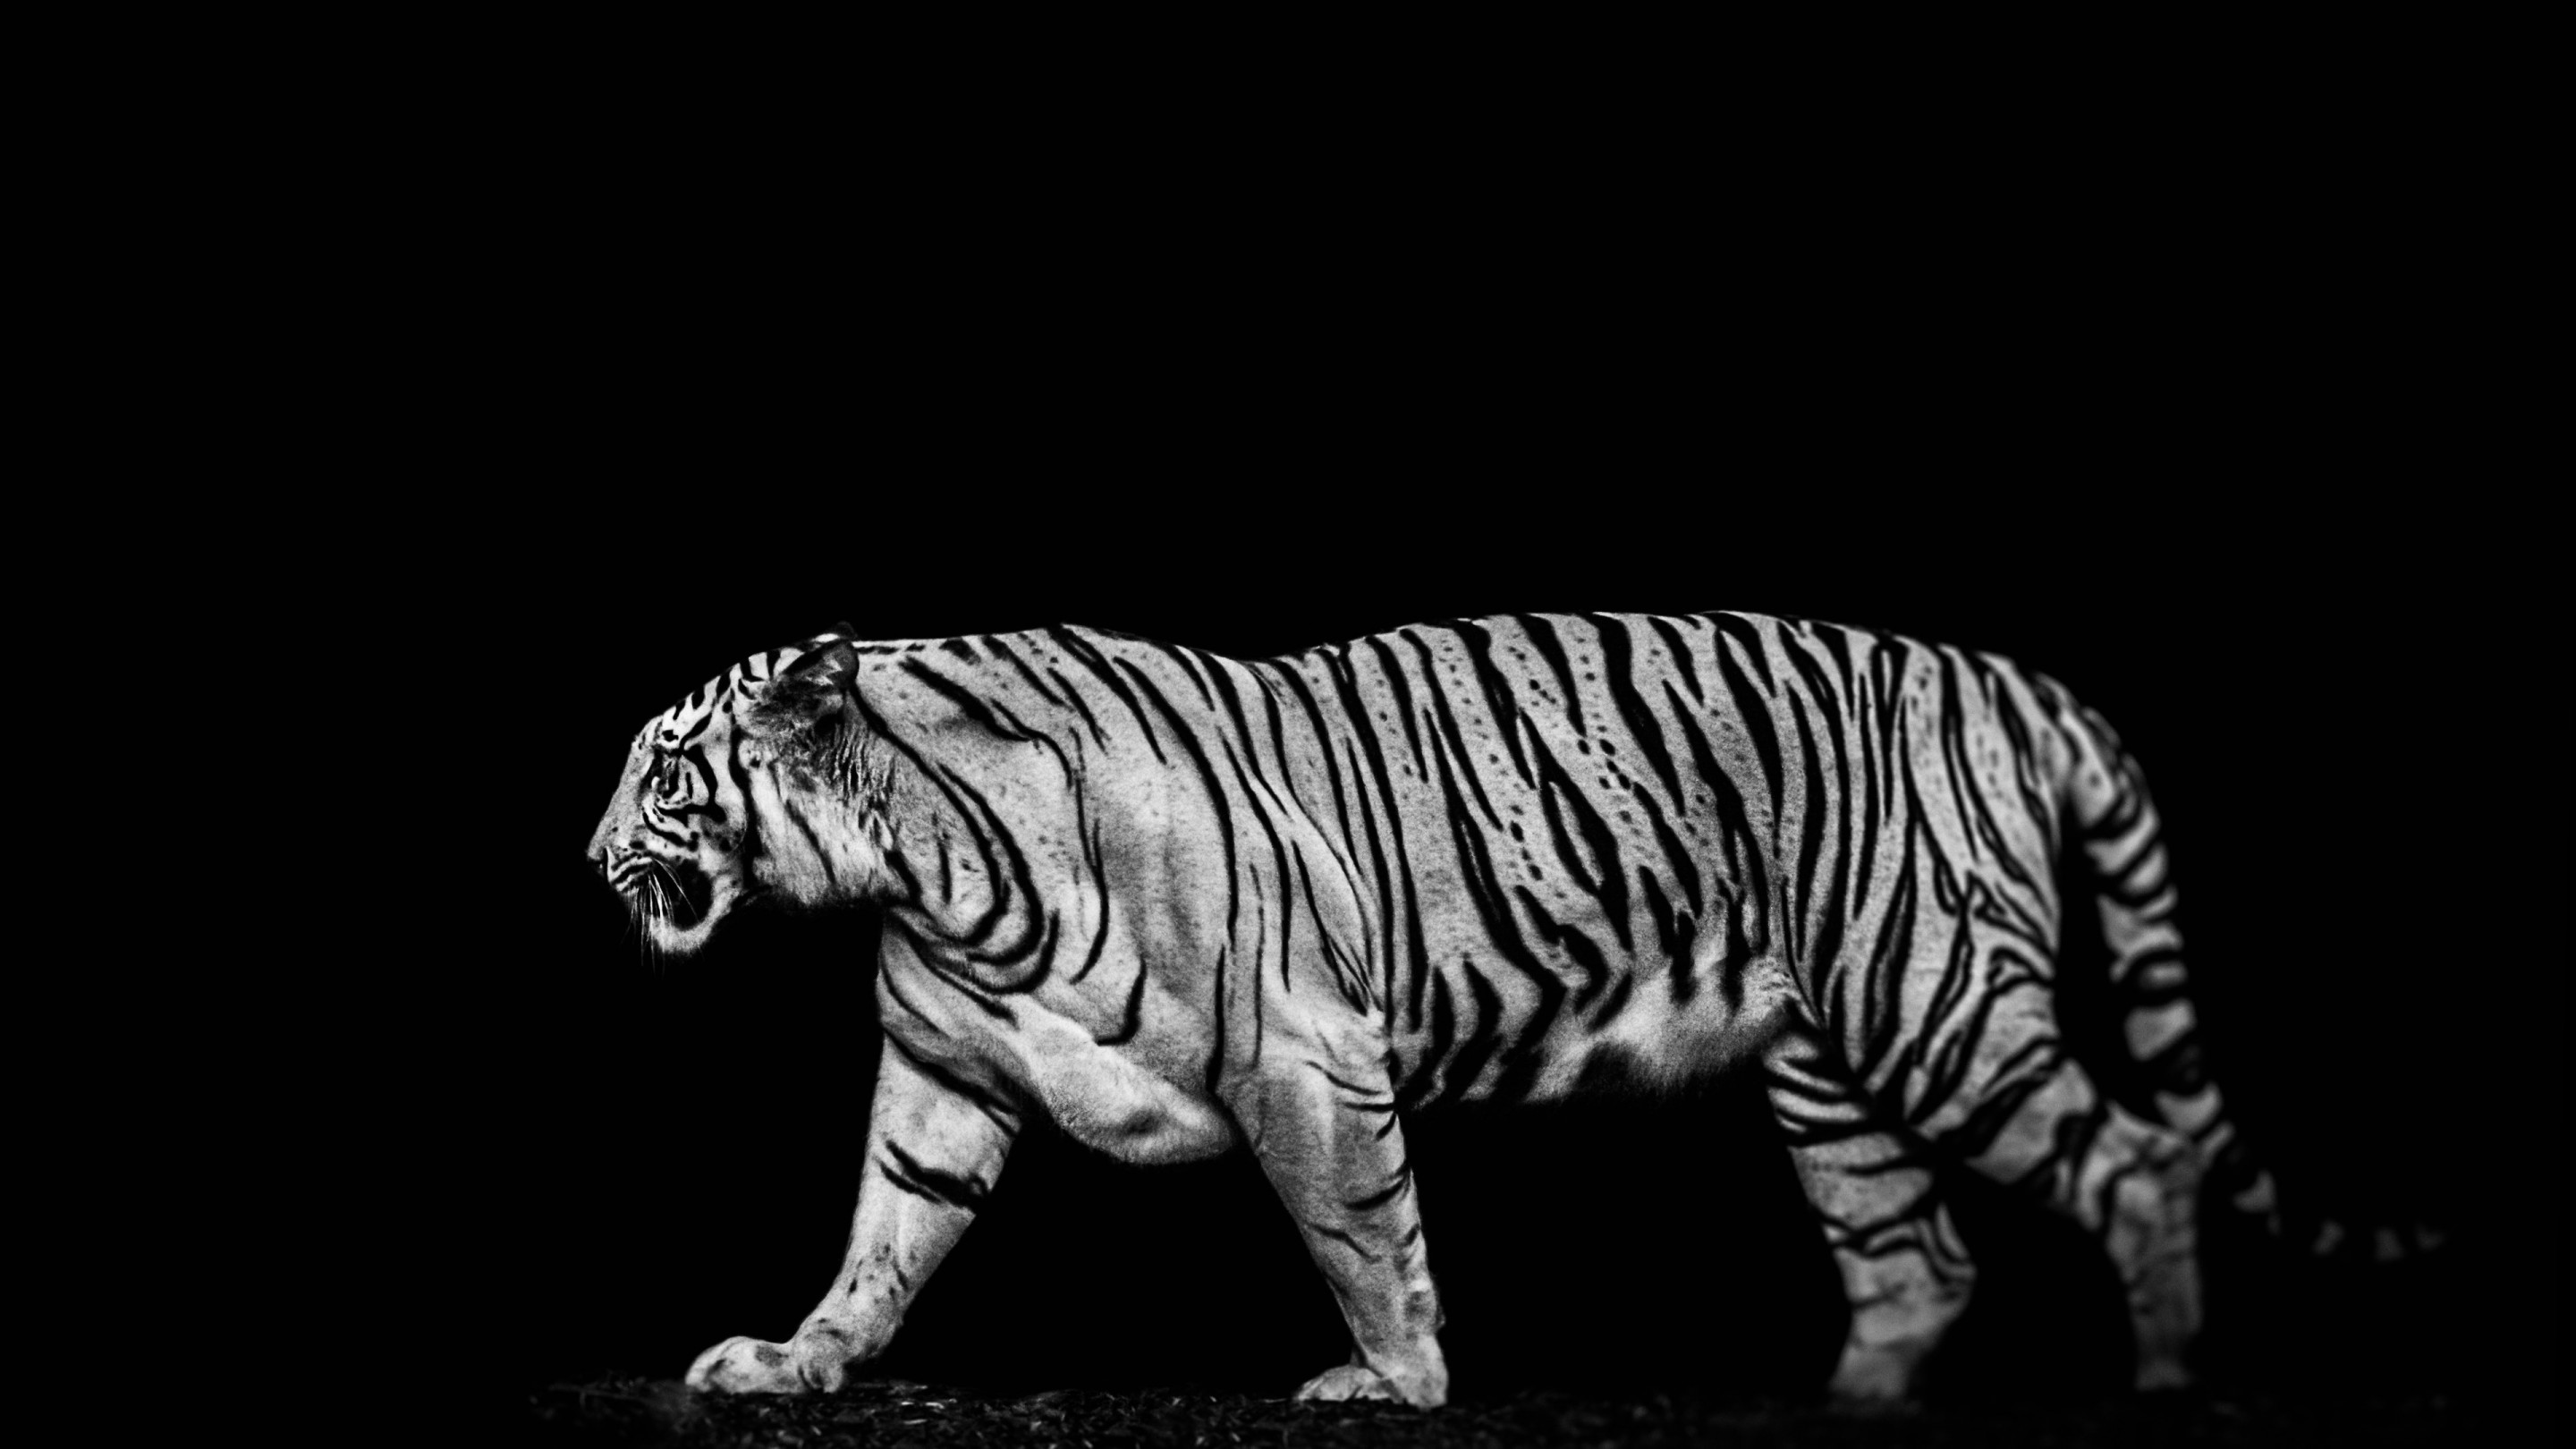 Tiger in the darkness wallpaper 2880x1620